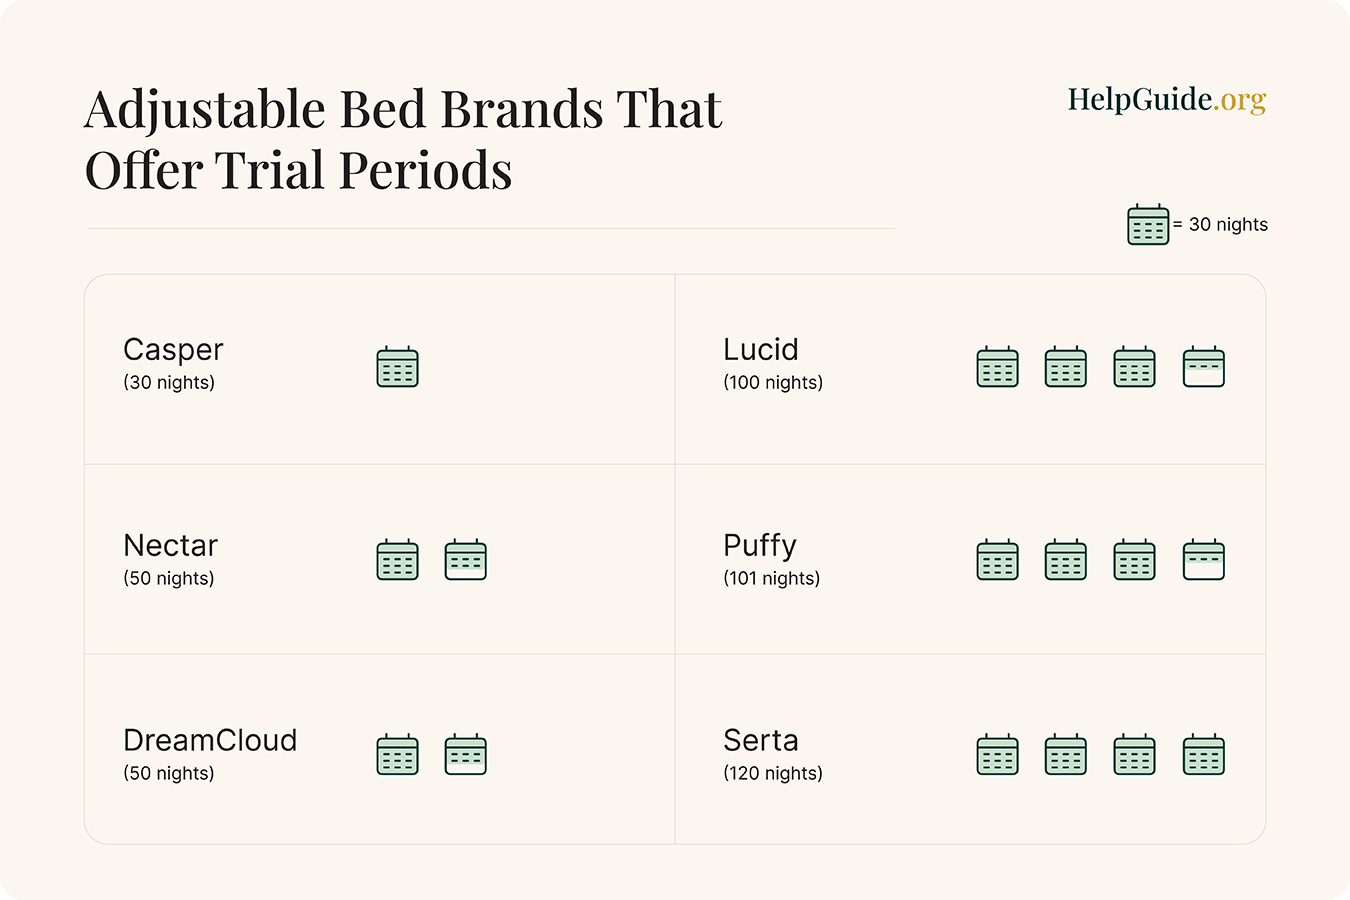 A comparison of adjustable bed brands’s trial period lengths